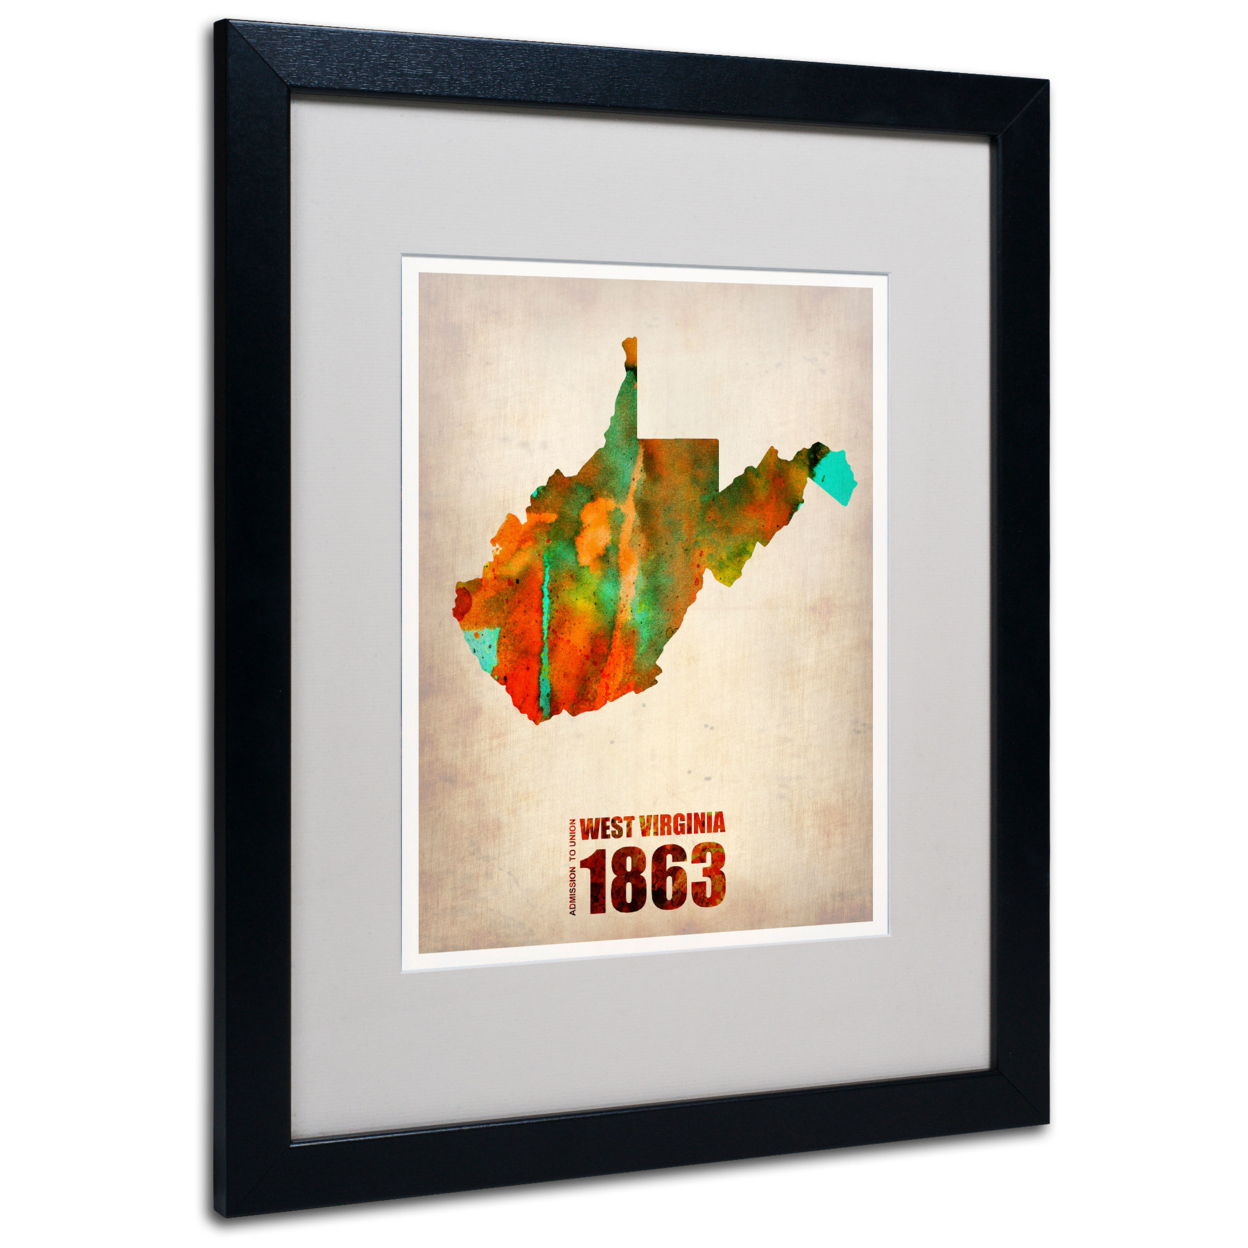 Naxart 'West Virginia Watercolor Map' Black Wooden Framed Art 18 X 22 Inches